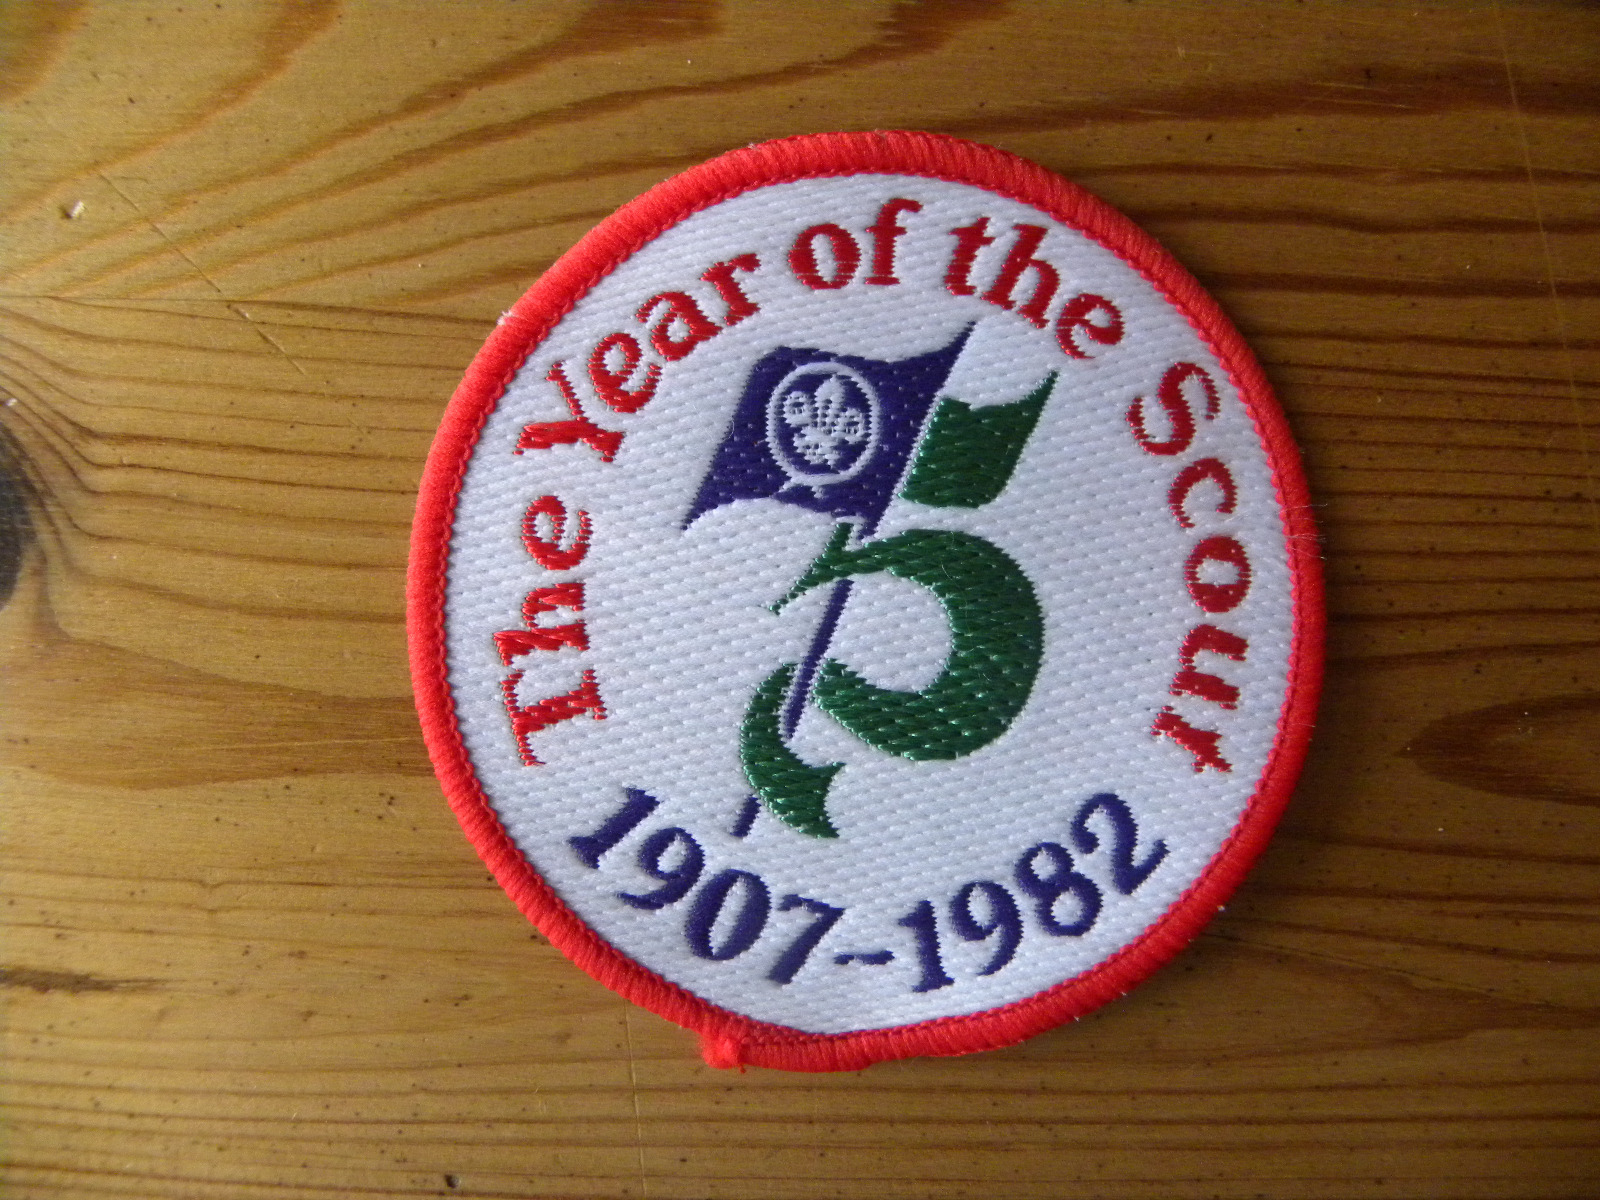 UK Scouting Year of the Scout 1907 1982 75th Anniversary Badge 